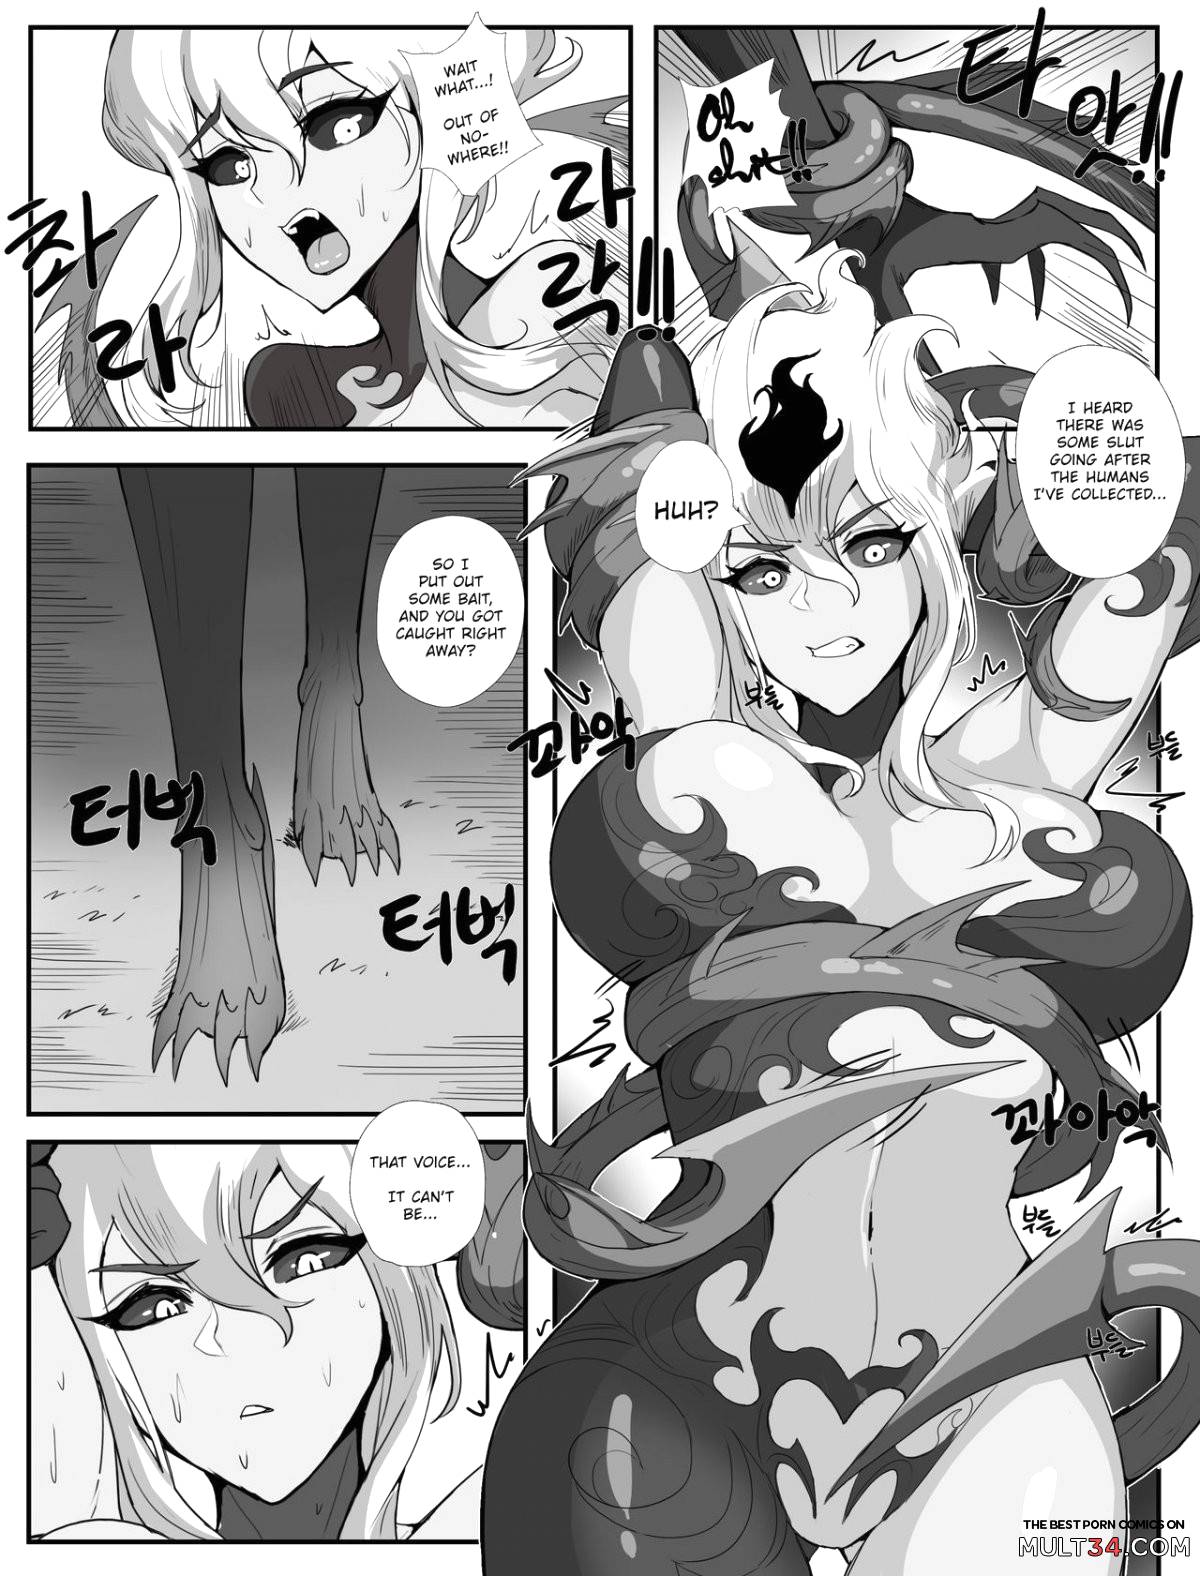 Evelynn and Zyra page 3